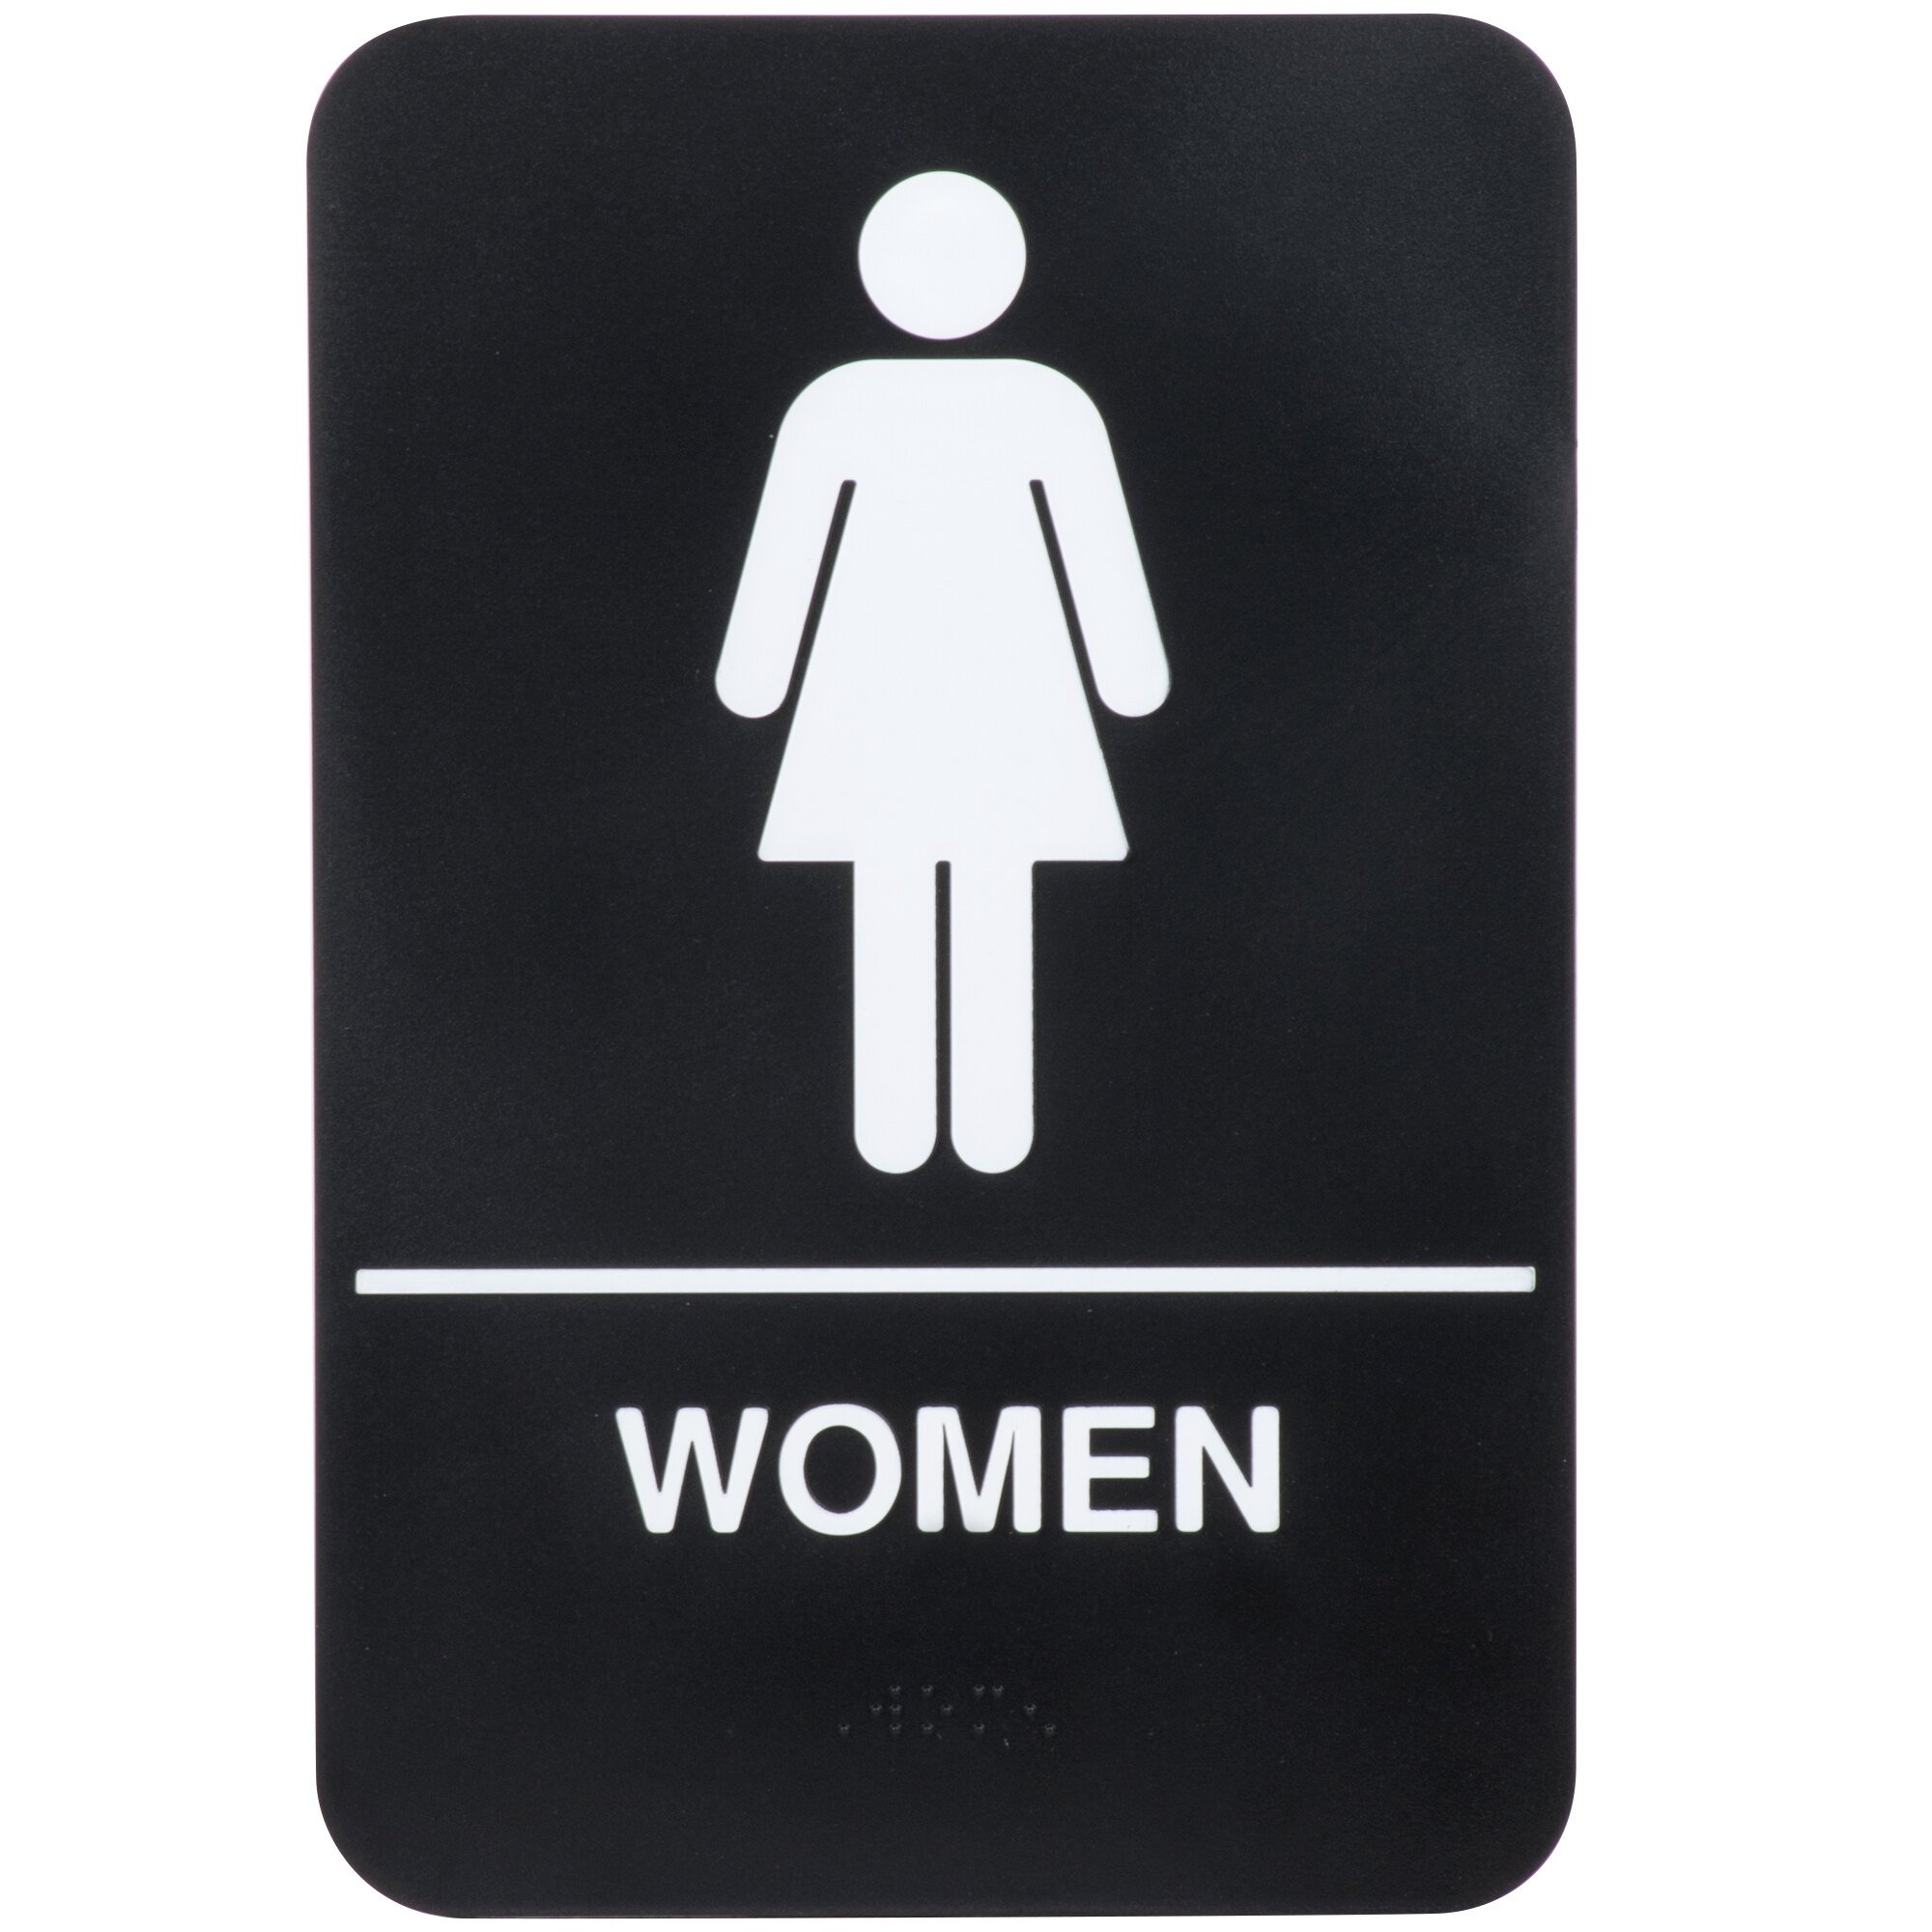 ADA Women's Restroom Sign with Braille Black and White, 9" x 6"